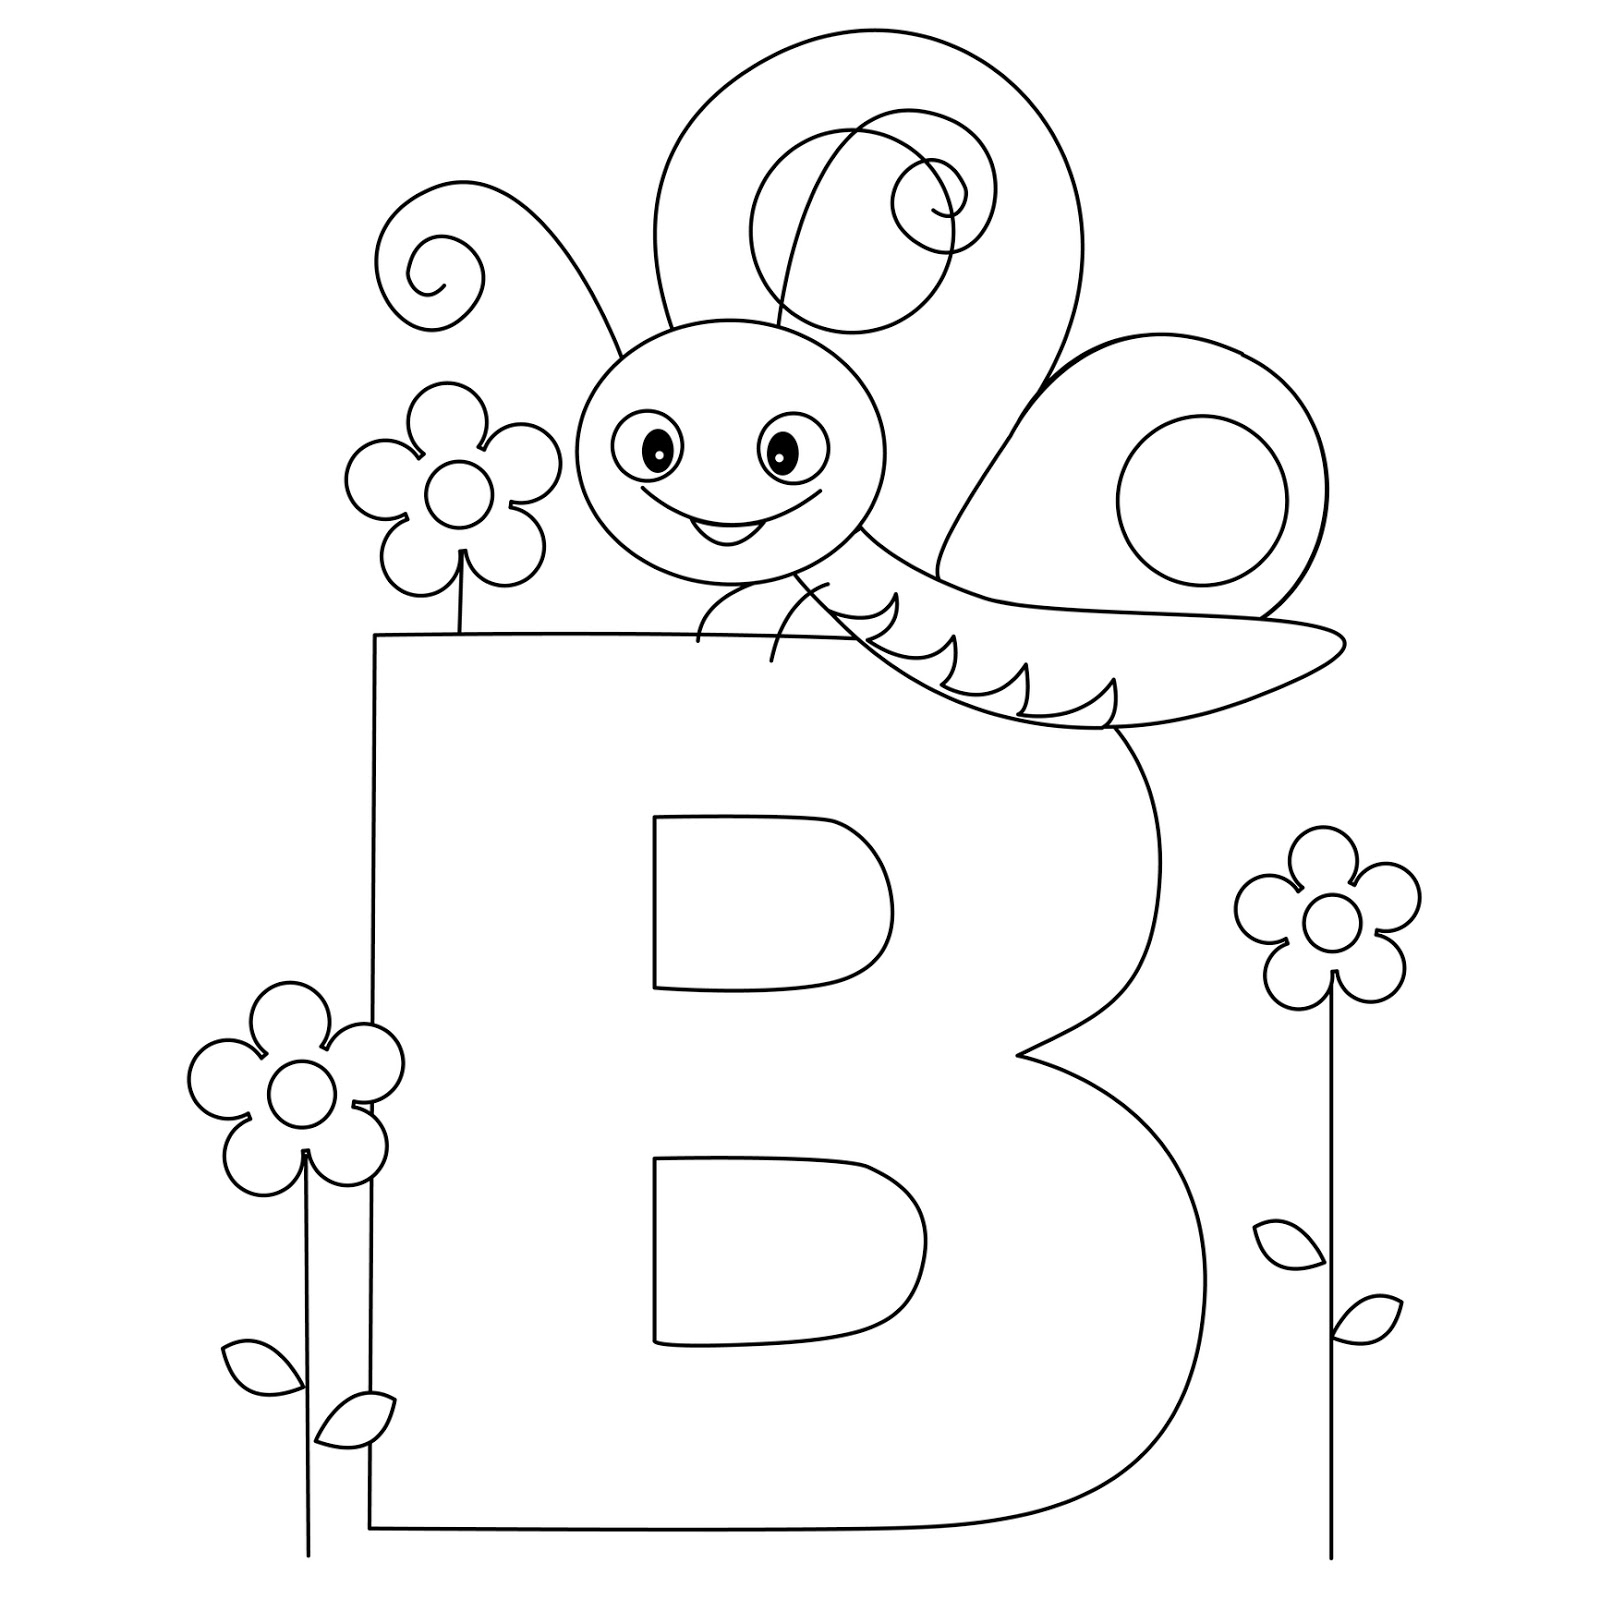 Letter B Coloring Pages Printable Free Printable Coloring Pages Alphabet Coloring Pages